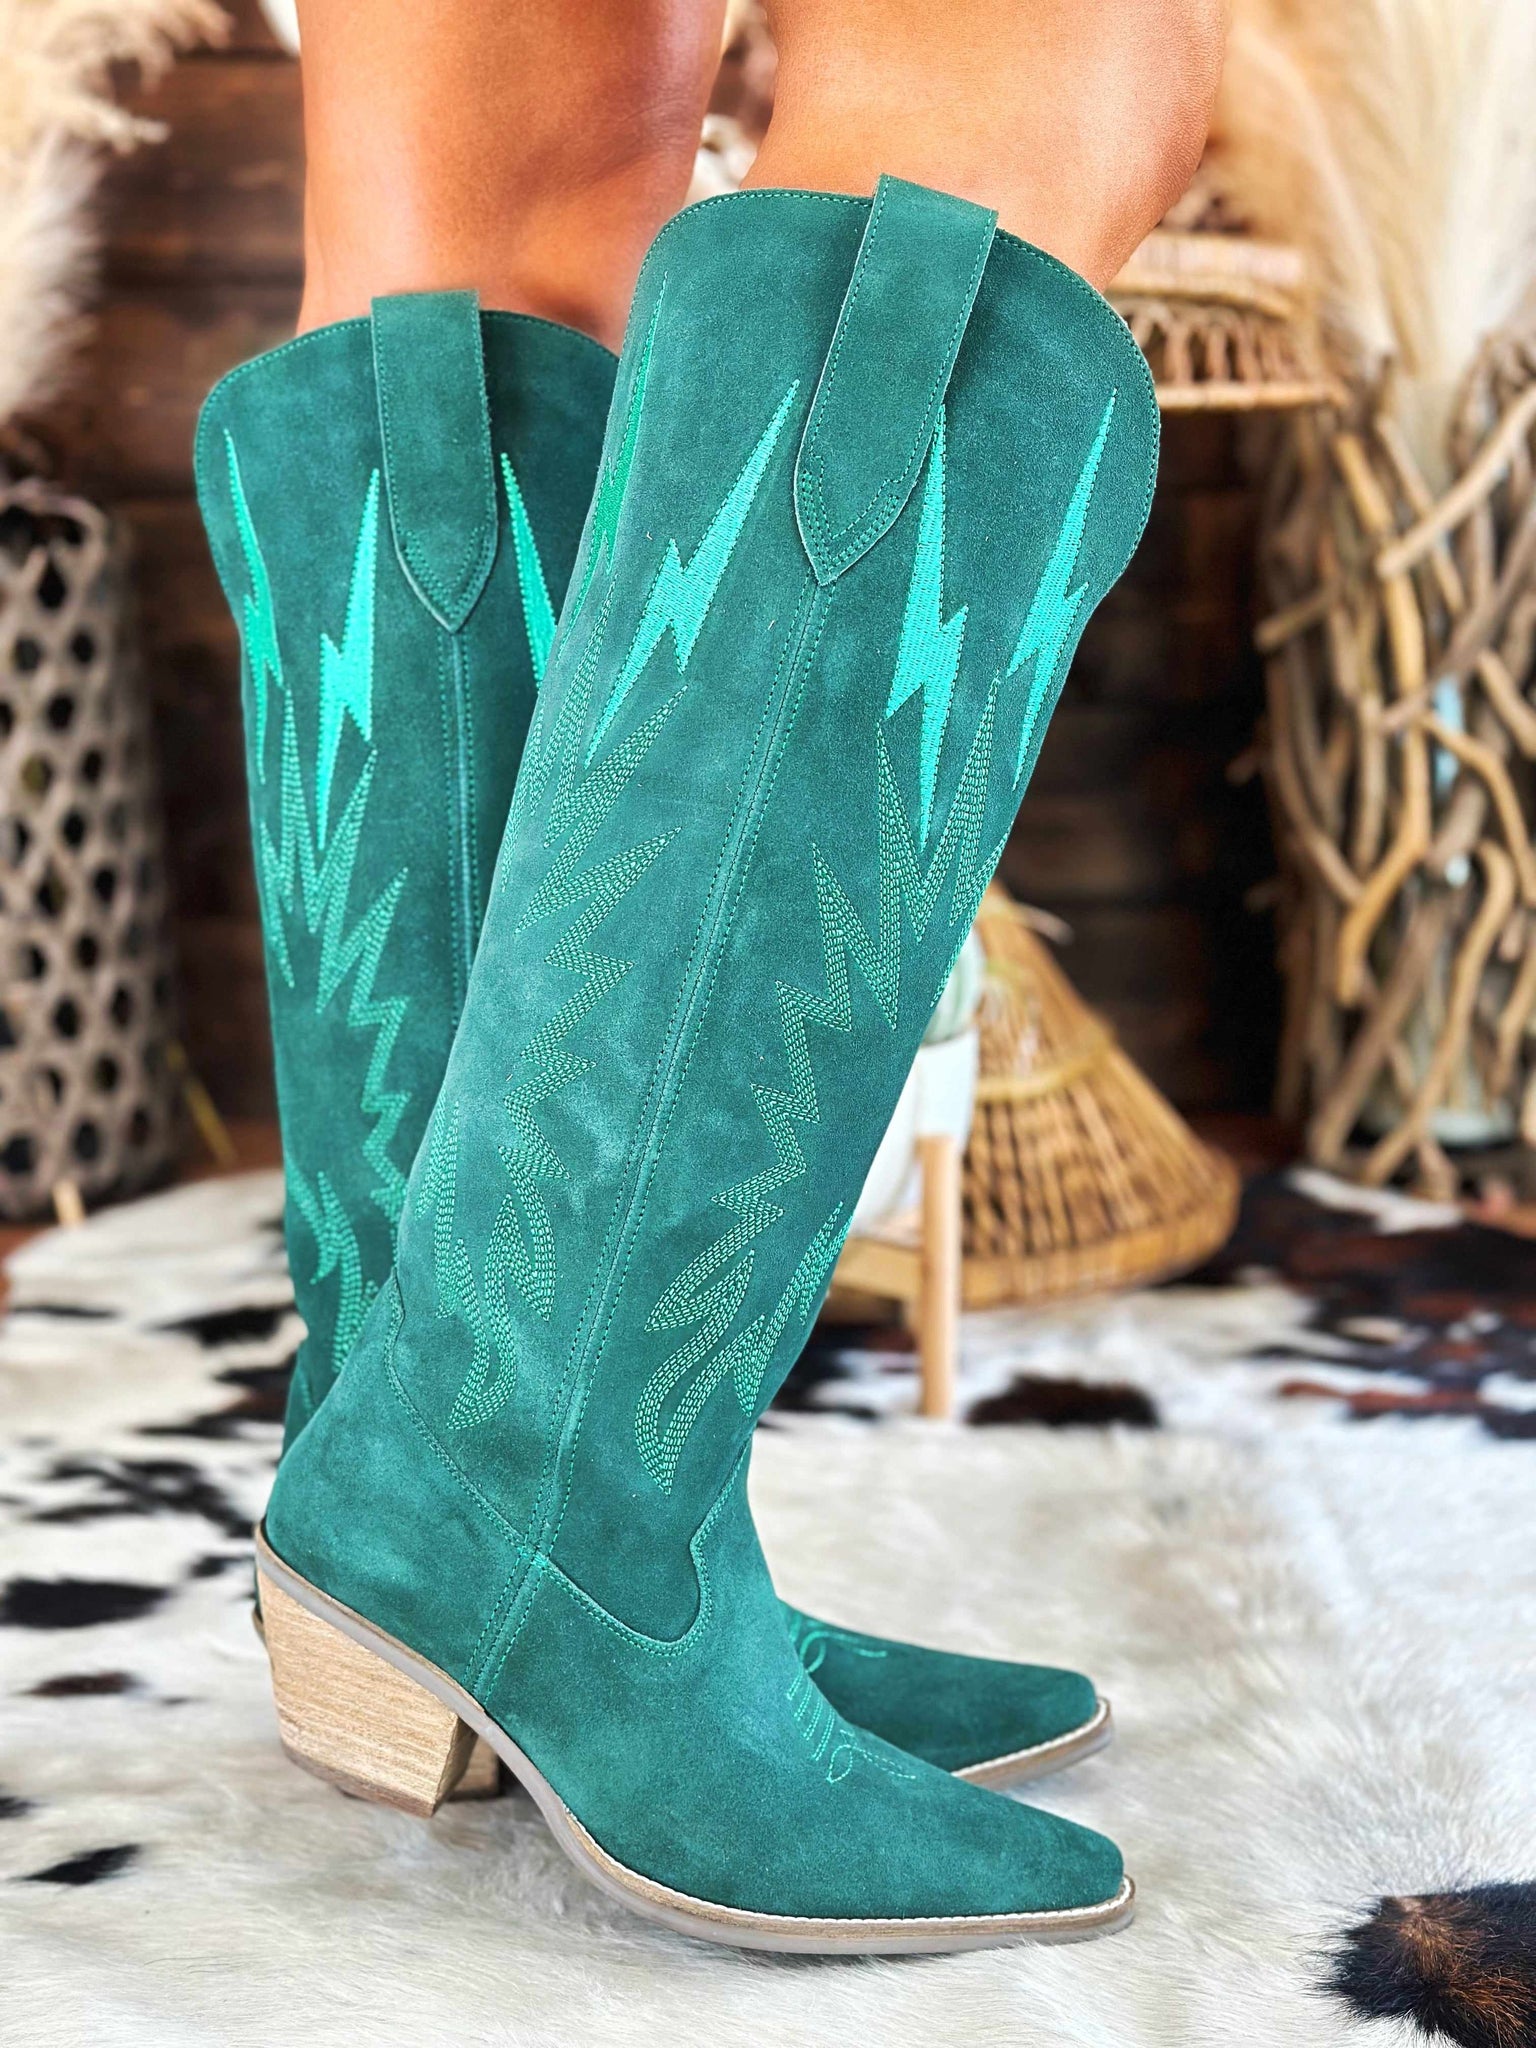 Thunder Road Boots by Dingo from Dan Post | Southern Fried Chics